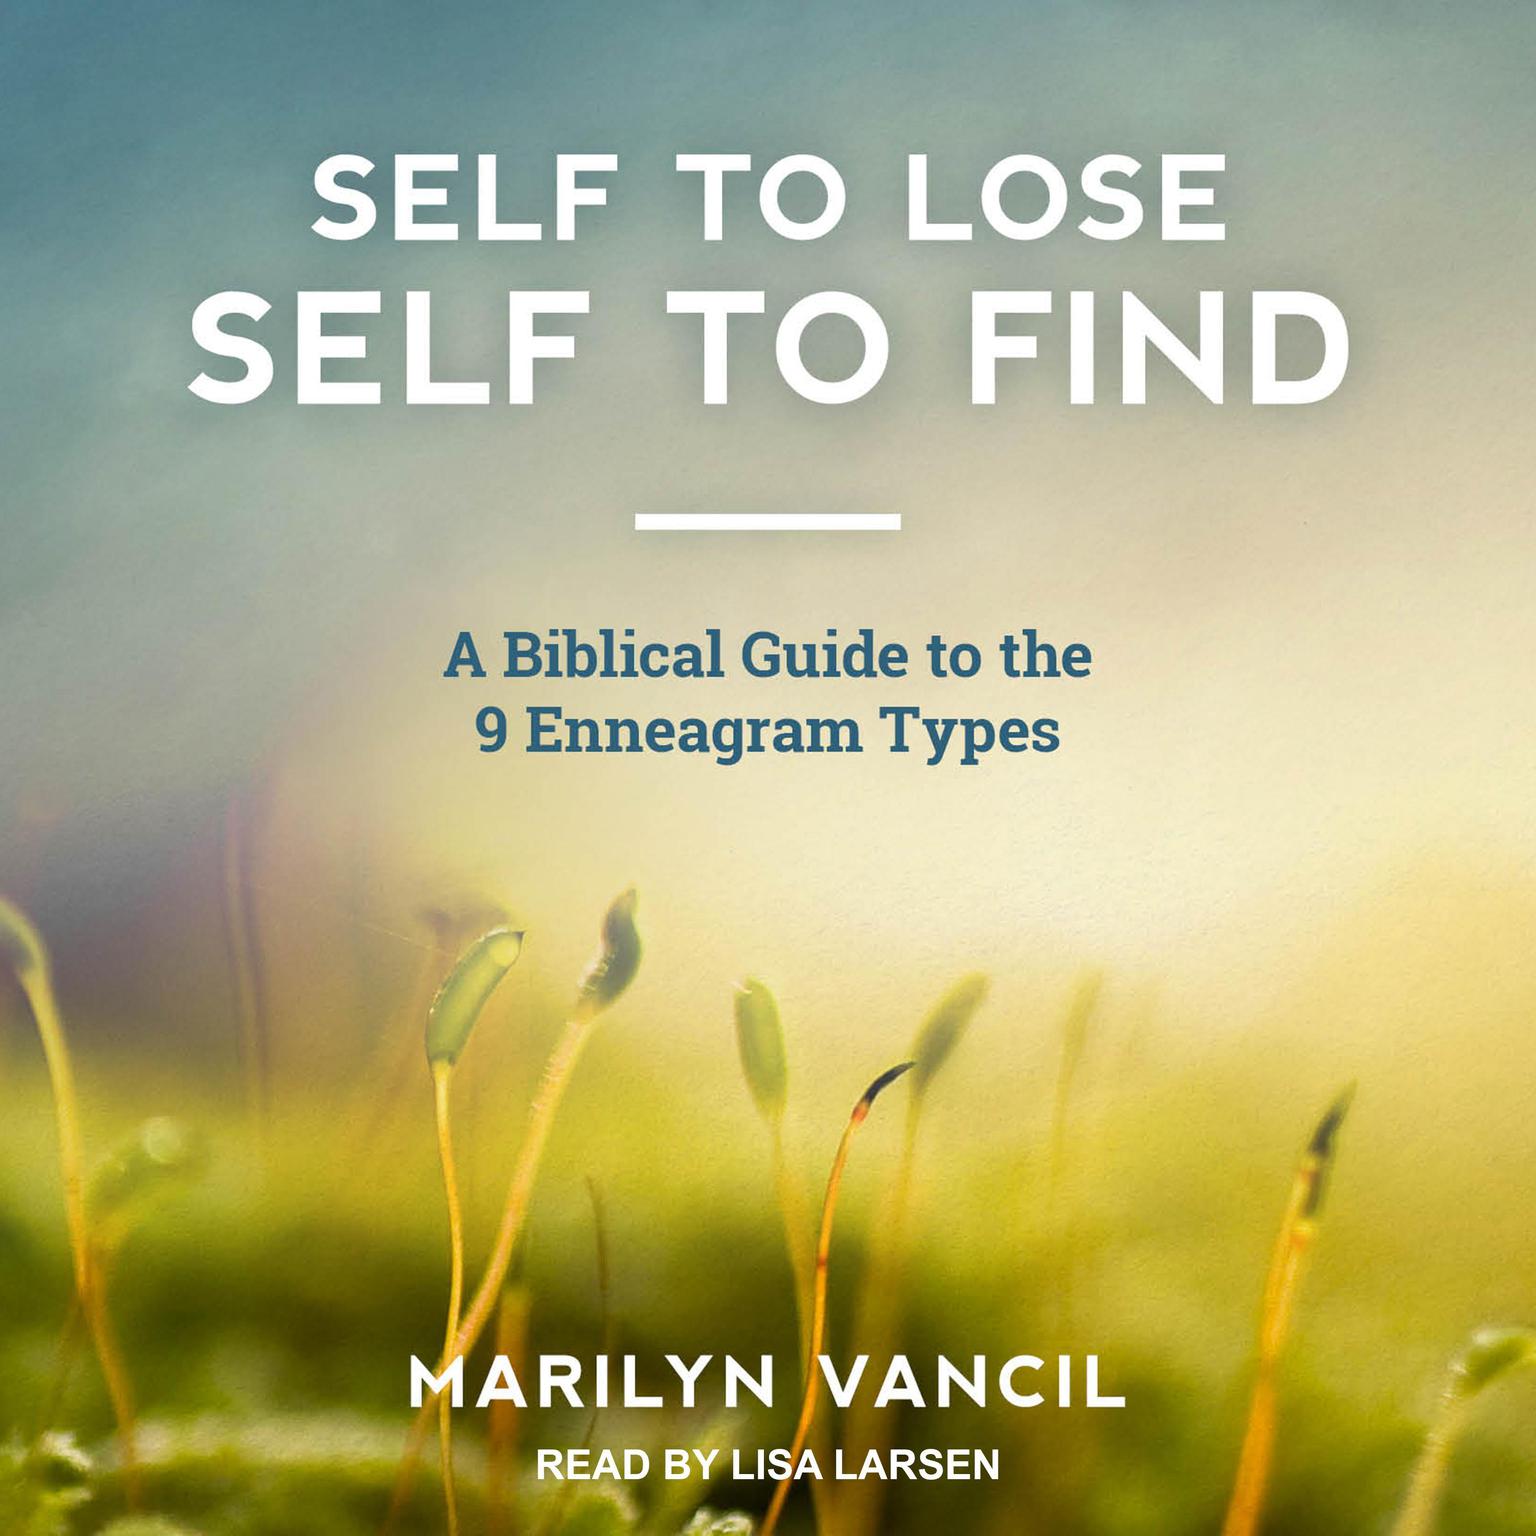 Self to Lose - Self to Find: A Biblical Approach to the 9 Enneagram Types Audiobook, by Marilyn Vancil